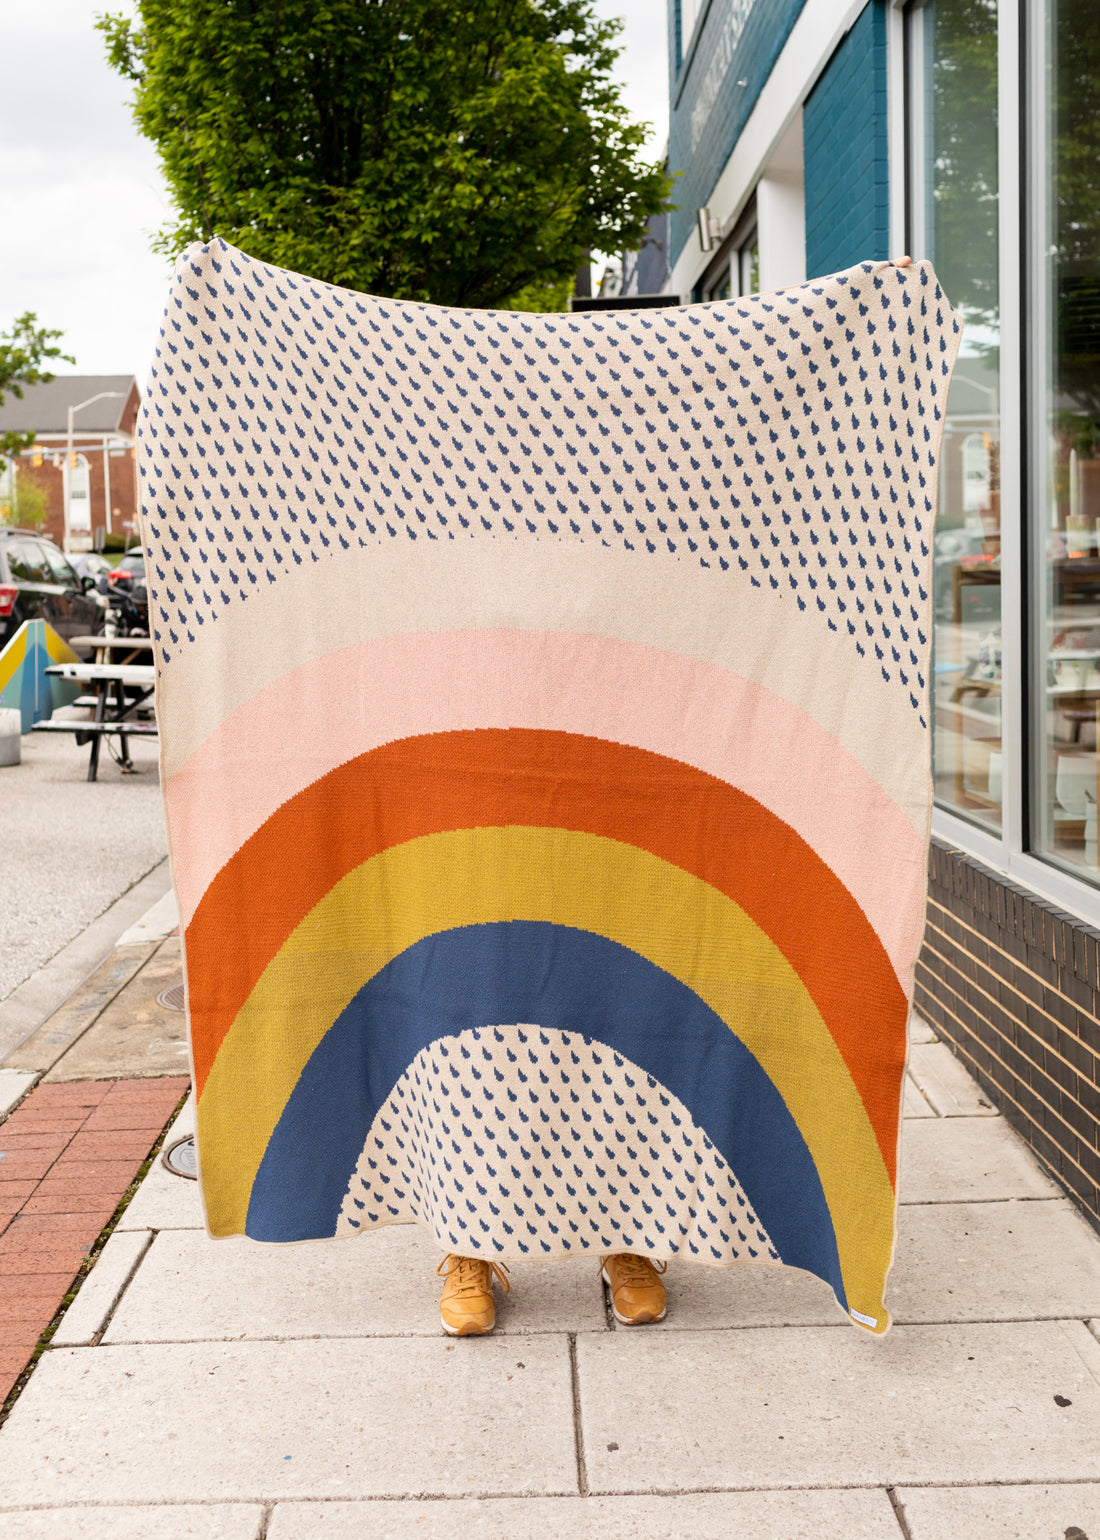 A woman holding up a blanket outside with blue raindrop dots throughout and a big rainbow in different colors on the blanket